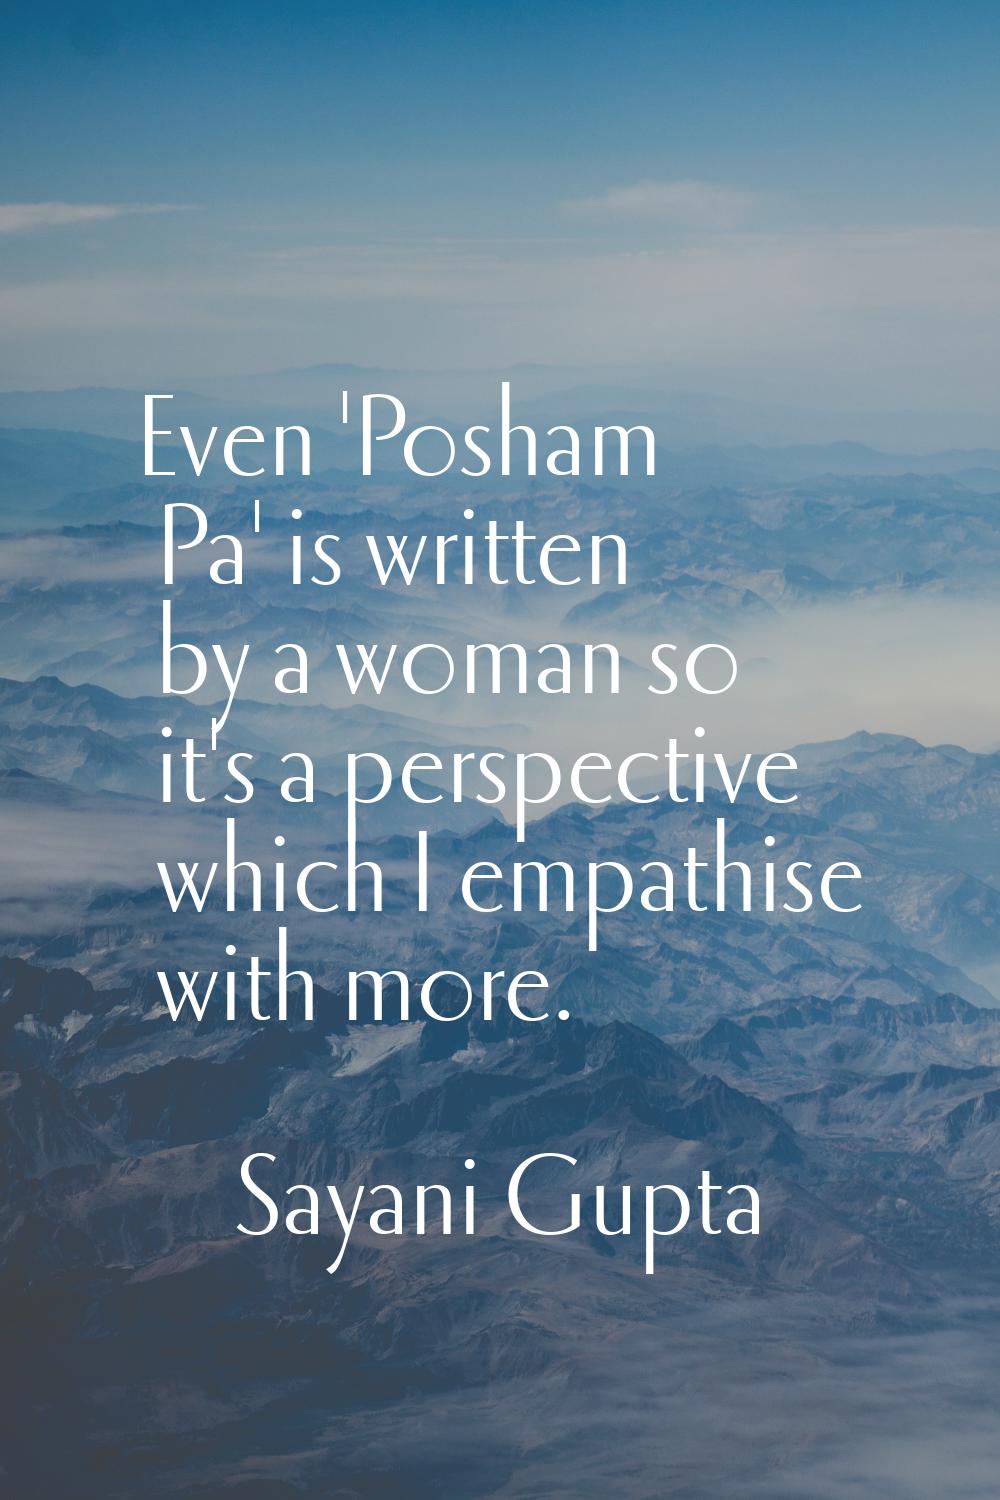 Even 'Posham Pa' is written by a woman so it's a perspective which I empathise with more.